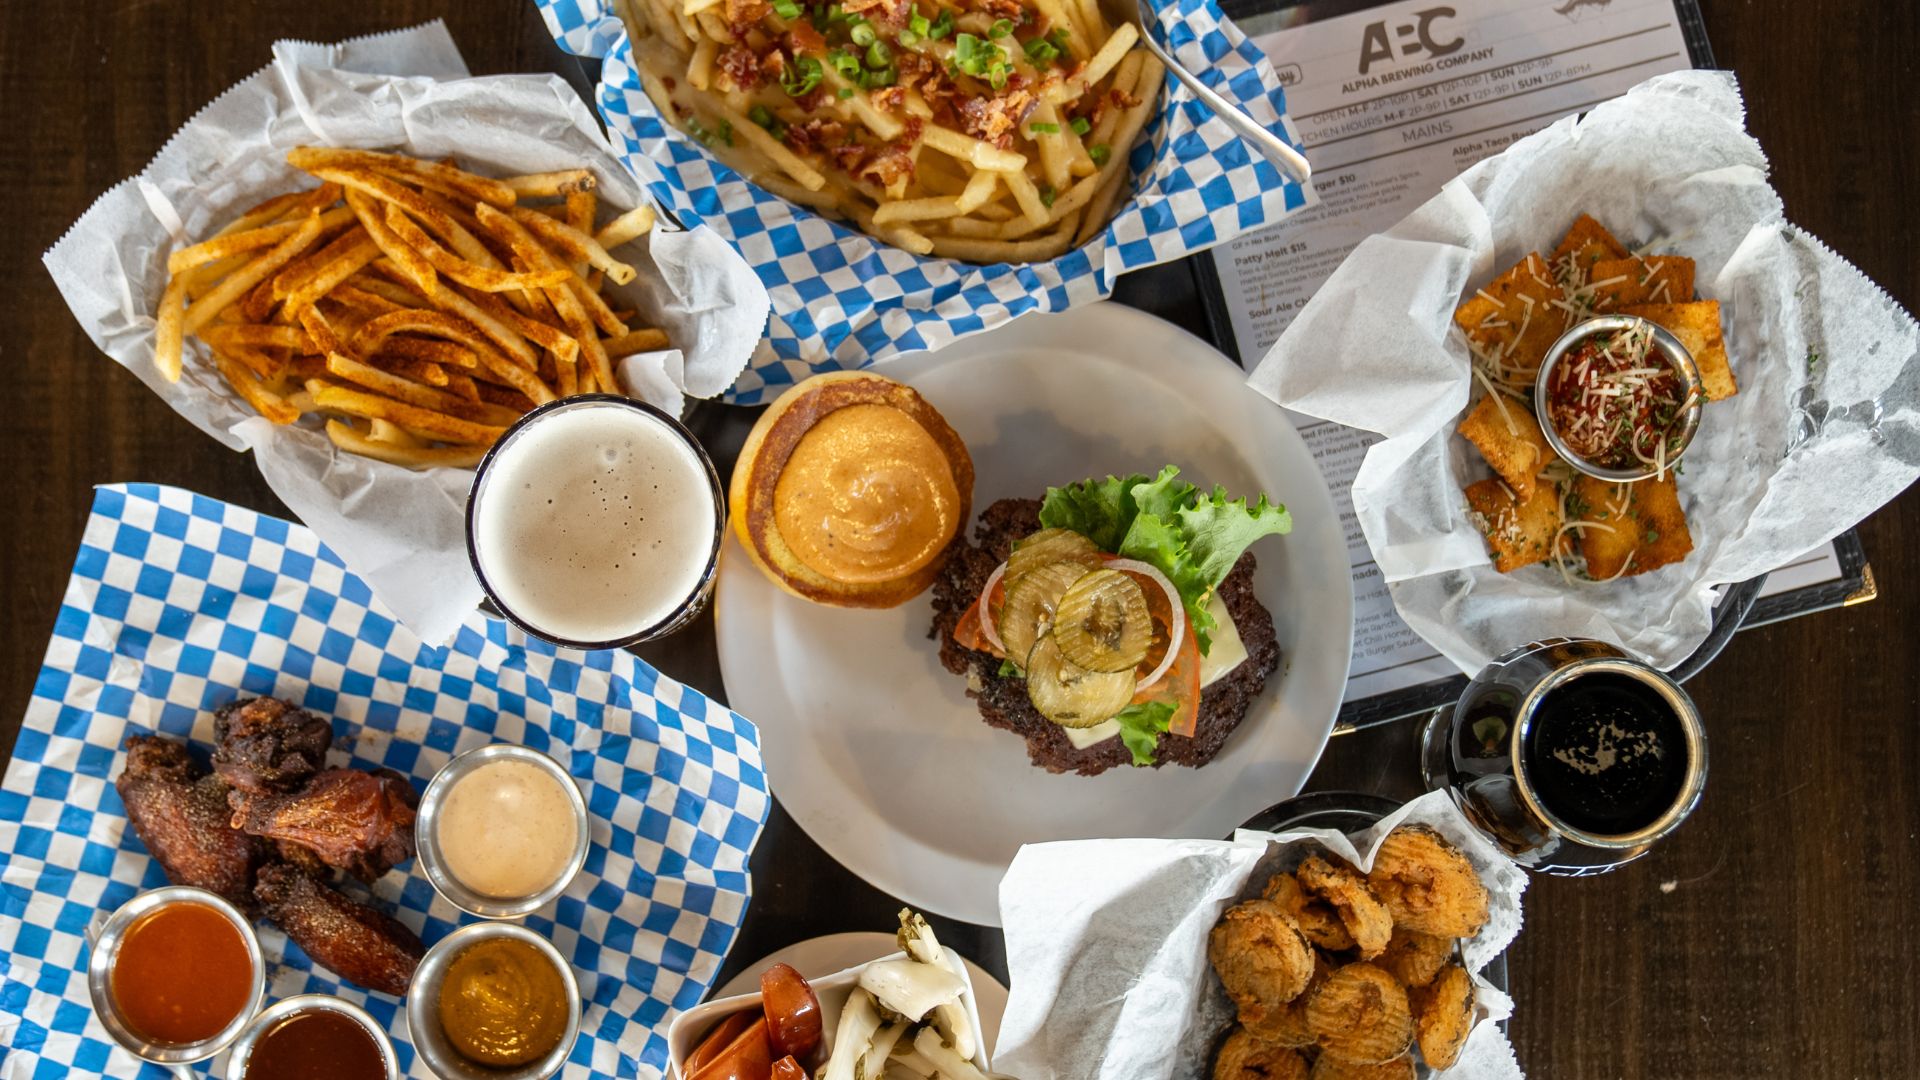 Alpha Brewing Company has a food program featuring burgers, wings and pickles.